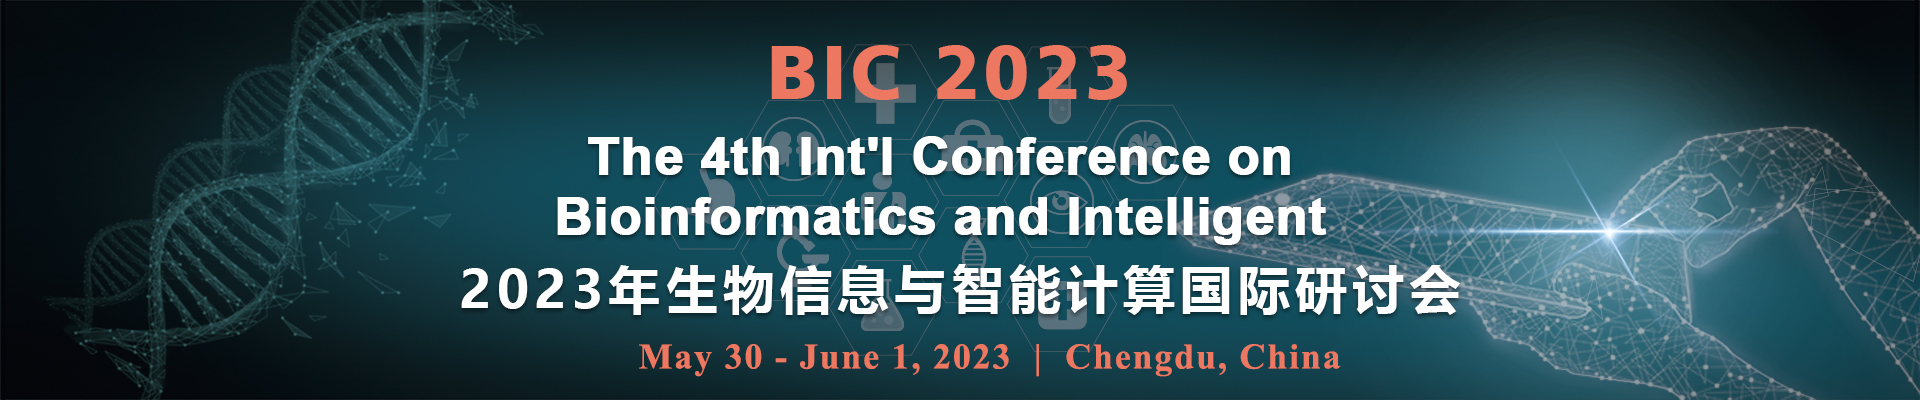 The 4th Int'l Conference on Bioinformatics and Intelligent Computing (BIC 2023)